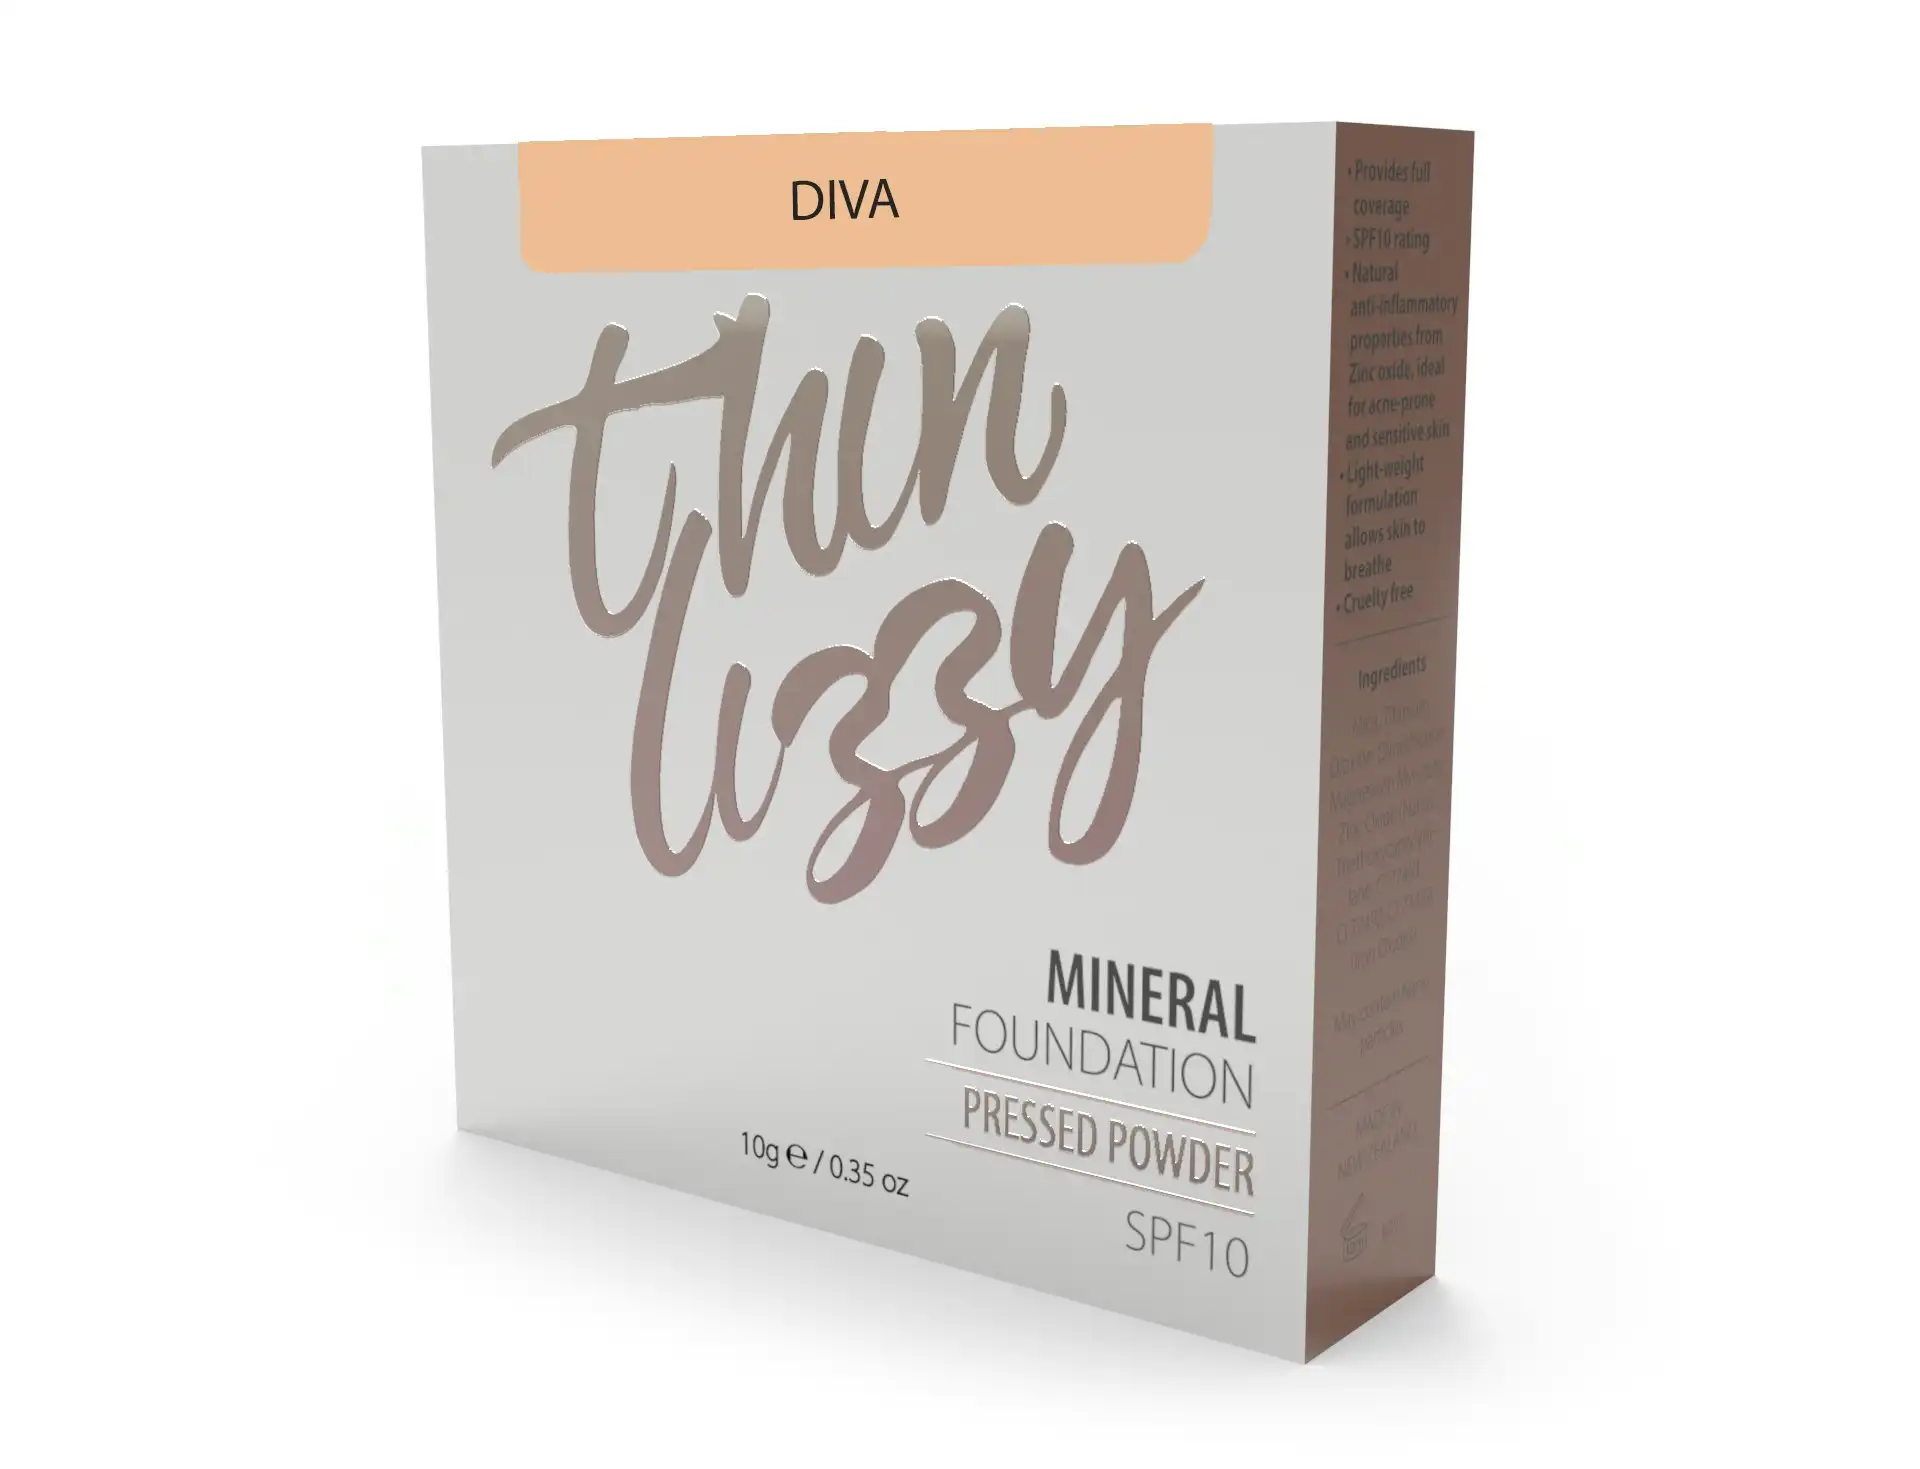 Thin Lizzy Pressed Mineral Foundation Diva